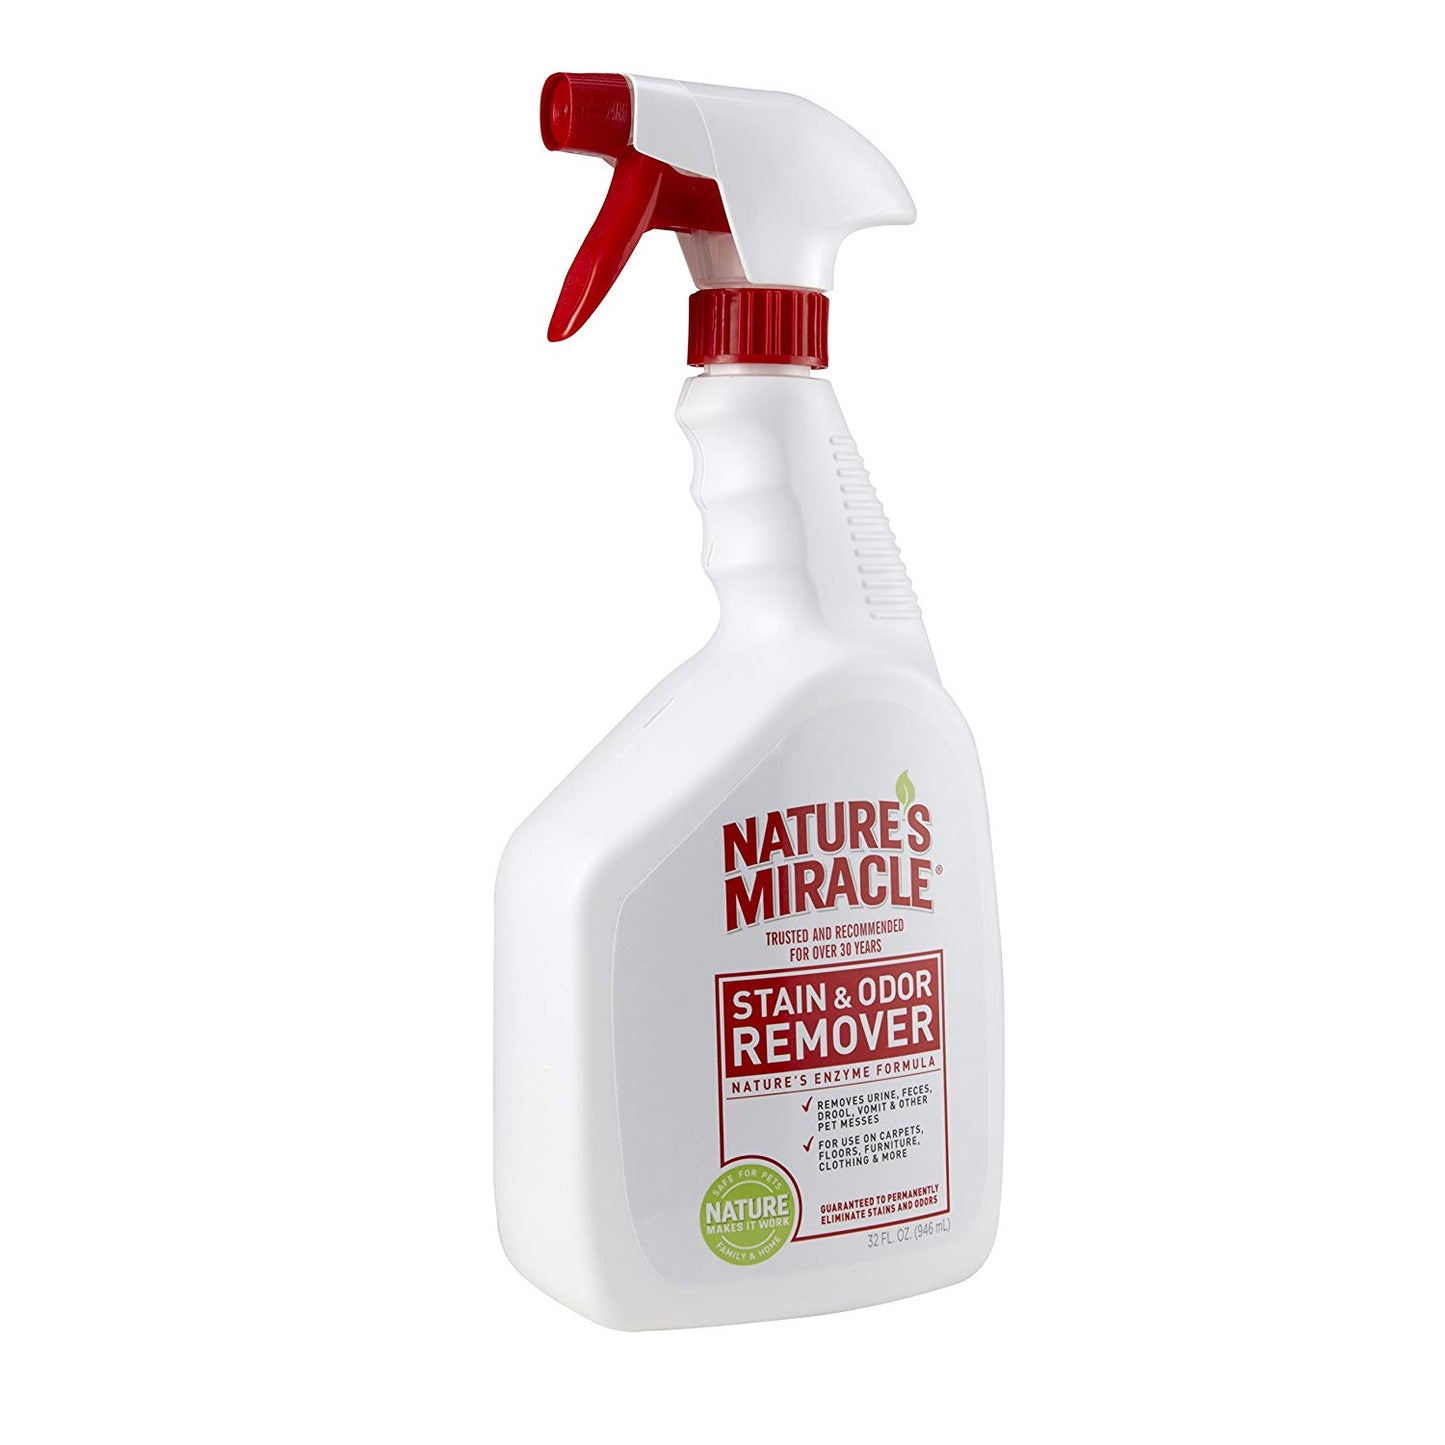 Nature's Miracle Stain & Odor Remover Trigger Spray, 32oz (P-5747)